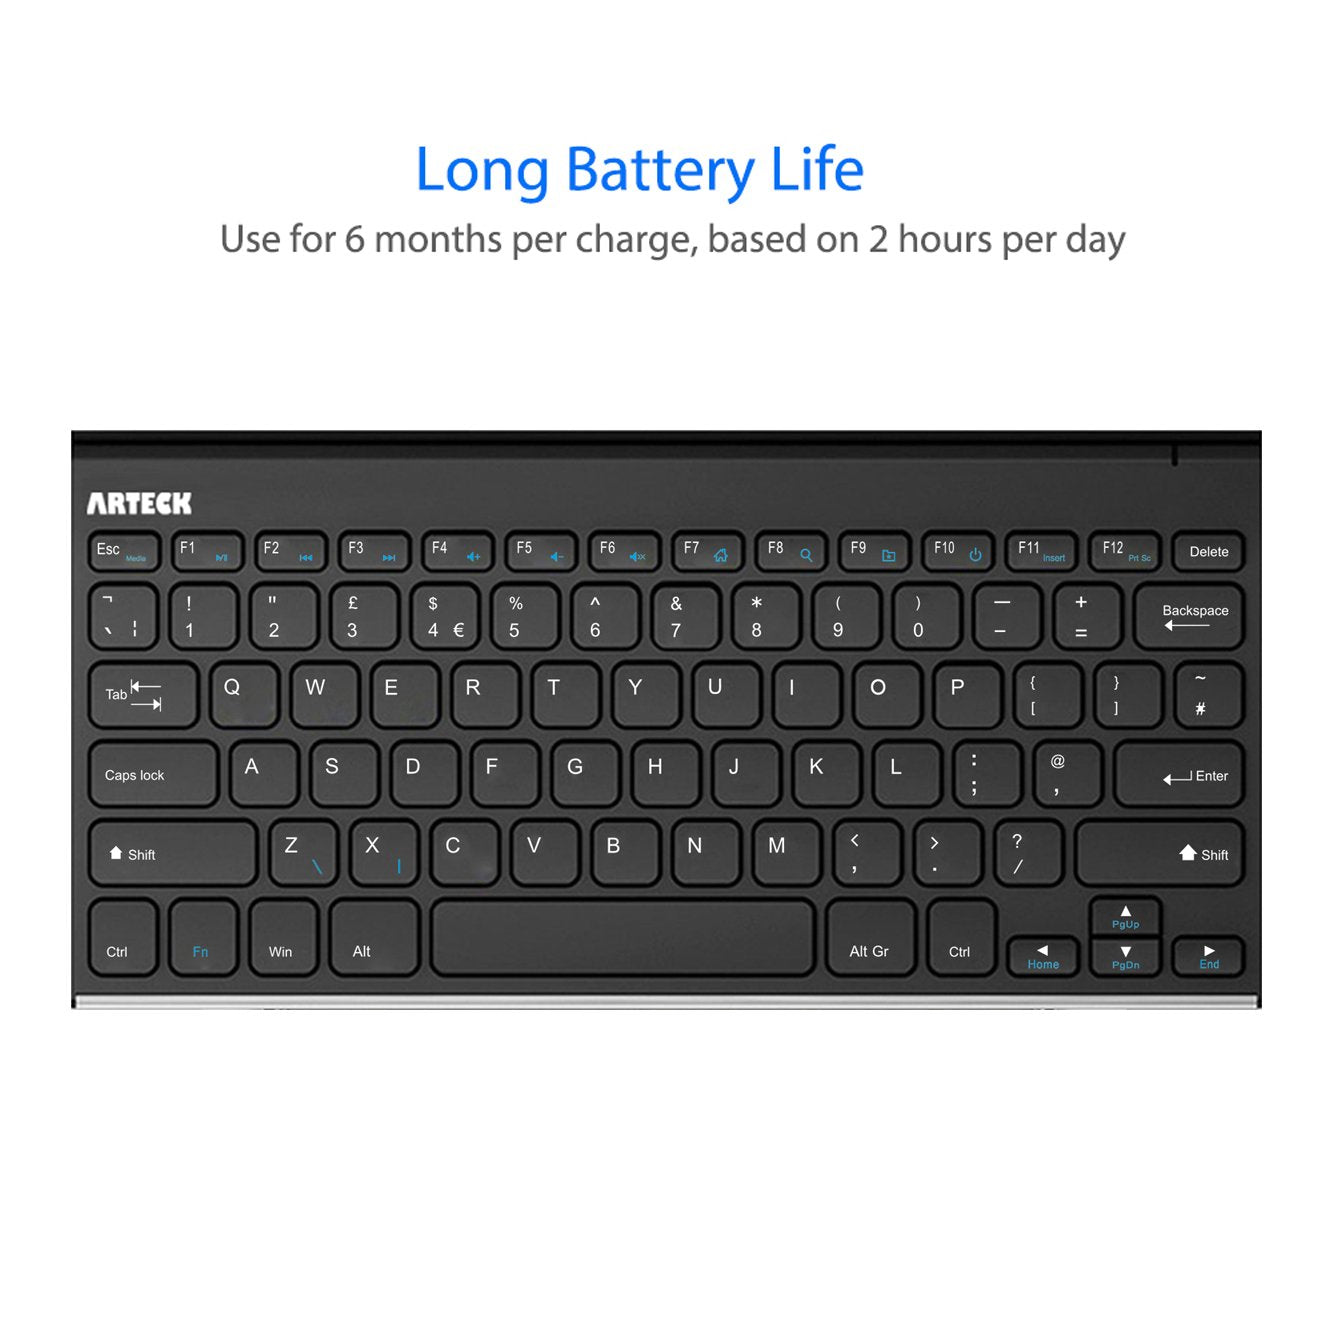 Arteck 2.4G Wireless Keyboard Stainless Steel Ultra Slim Full Size Keyboard for Computer/Desktop/PC/Laptop/Surface/Smart TV and Windows 10/8 / 7 Built in Rechargeable 6-Month Battery